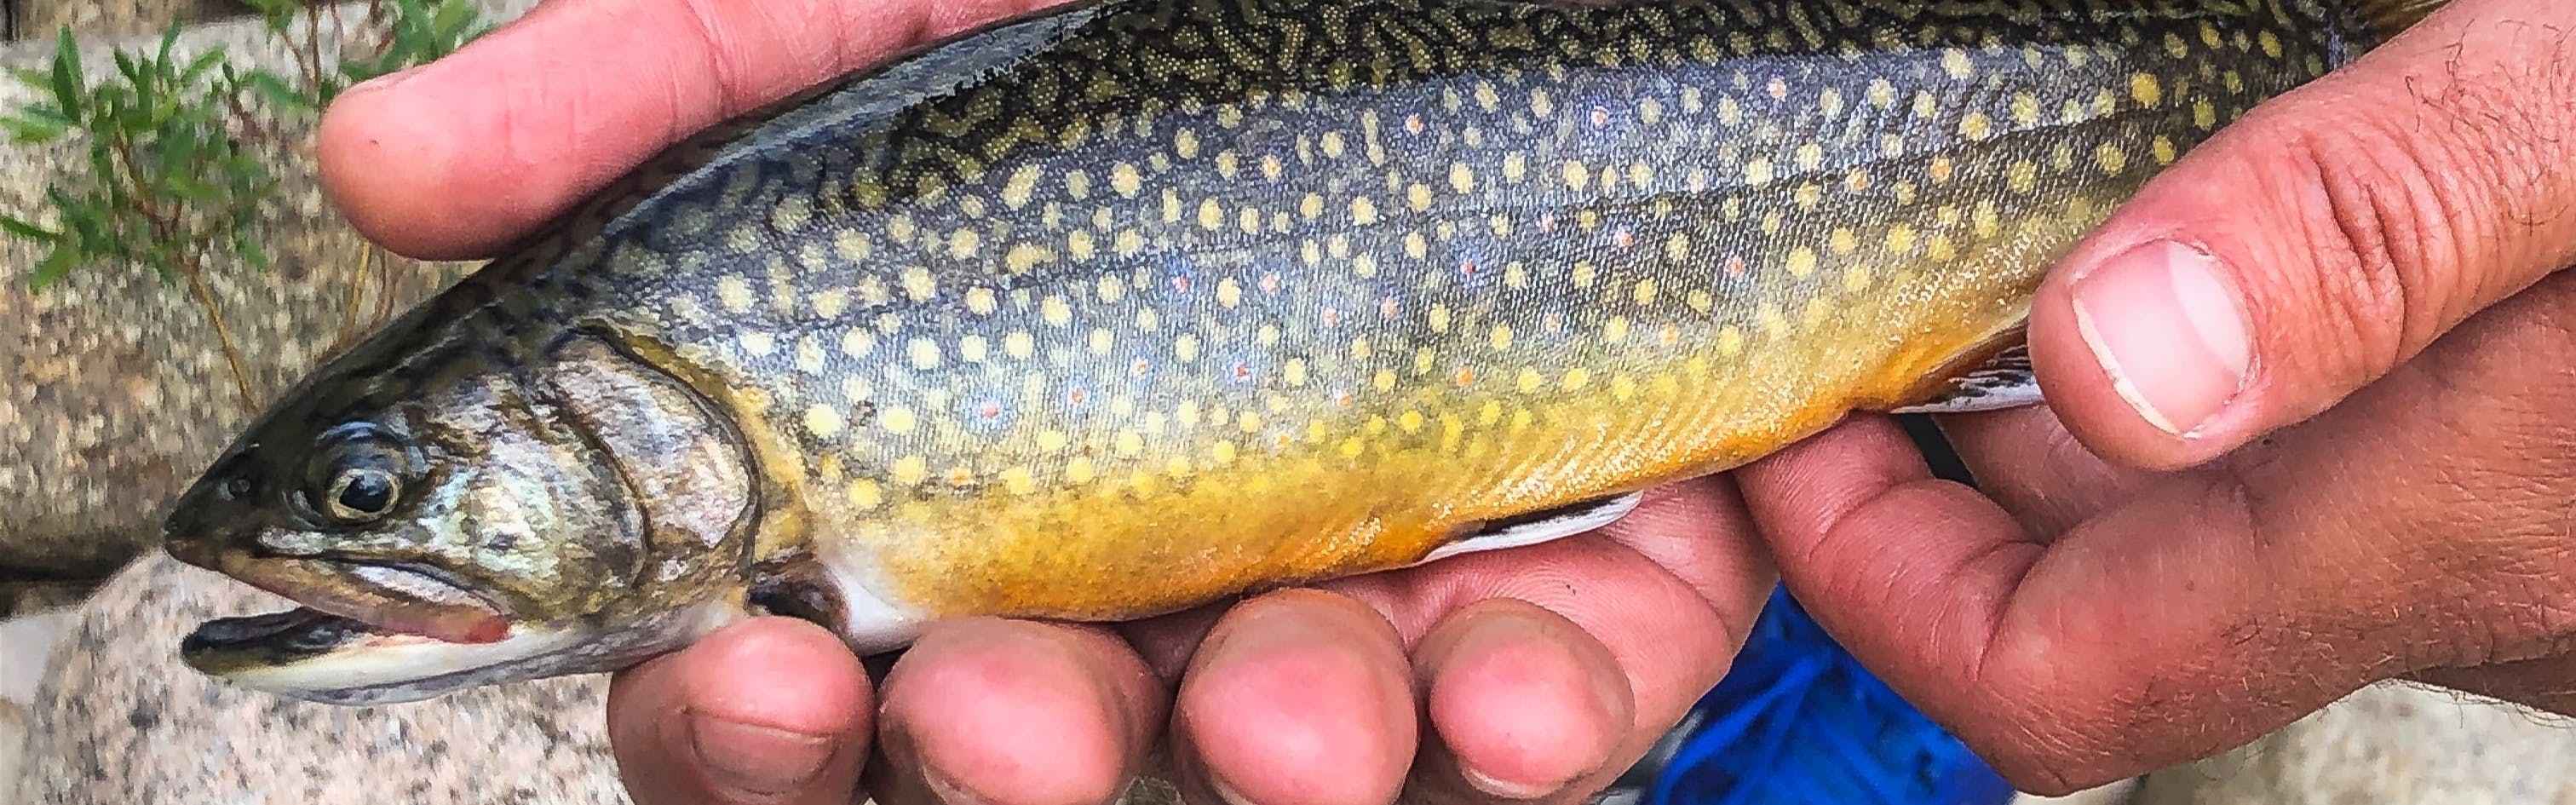 Fly Fishing in Pennsylvania: Tips for a Successful Fishing Day in PA